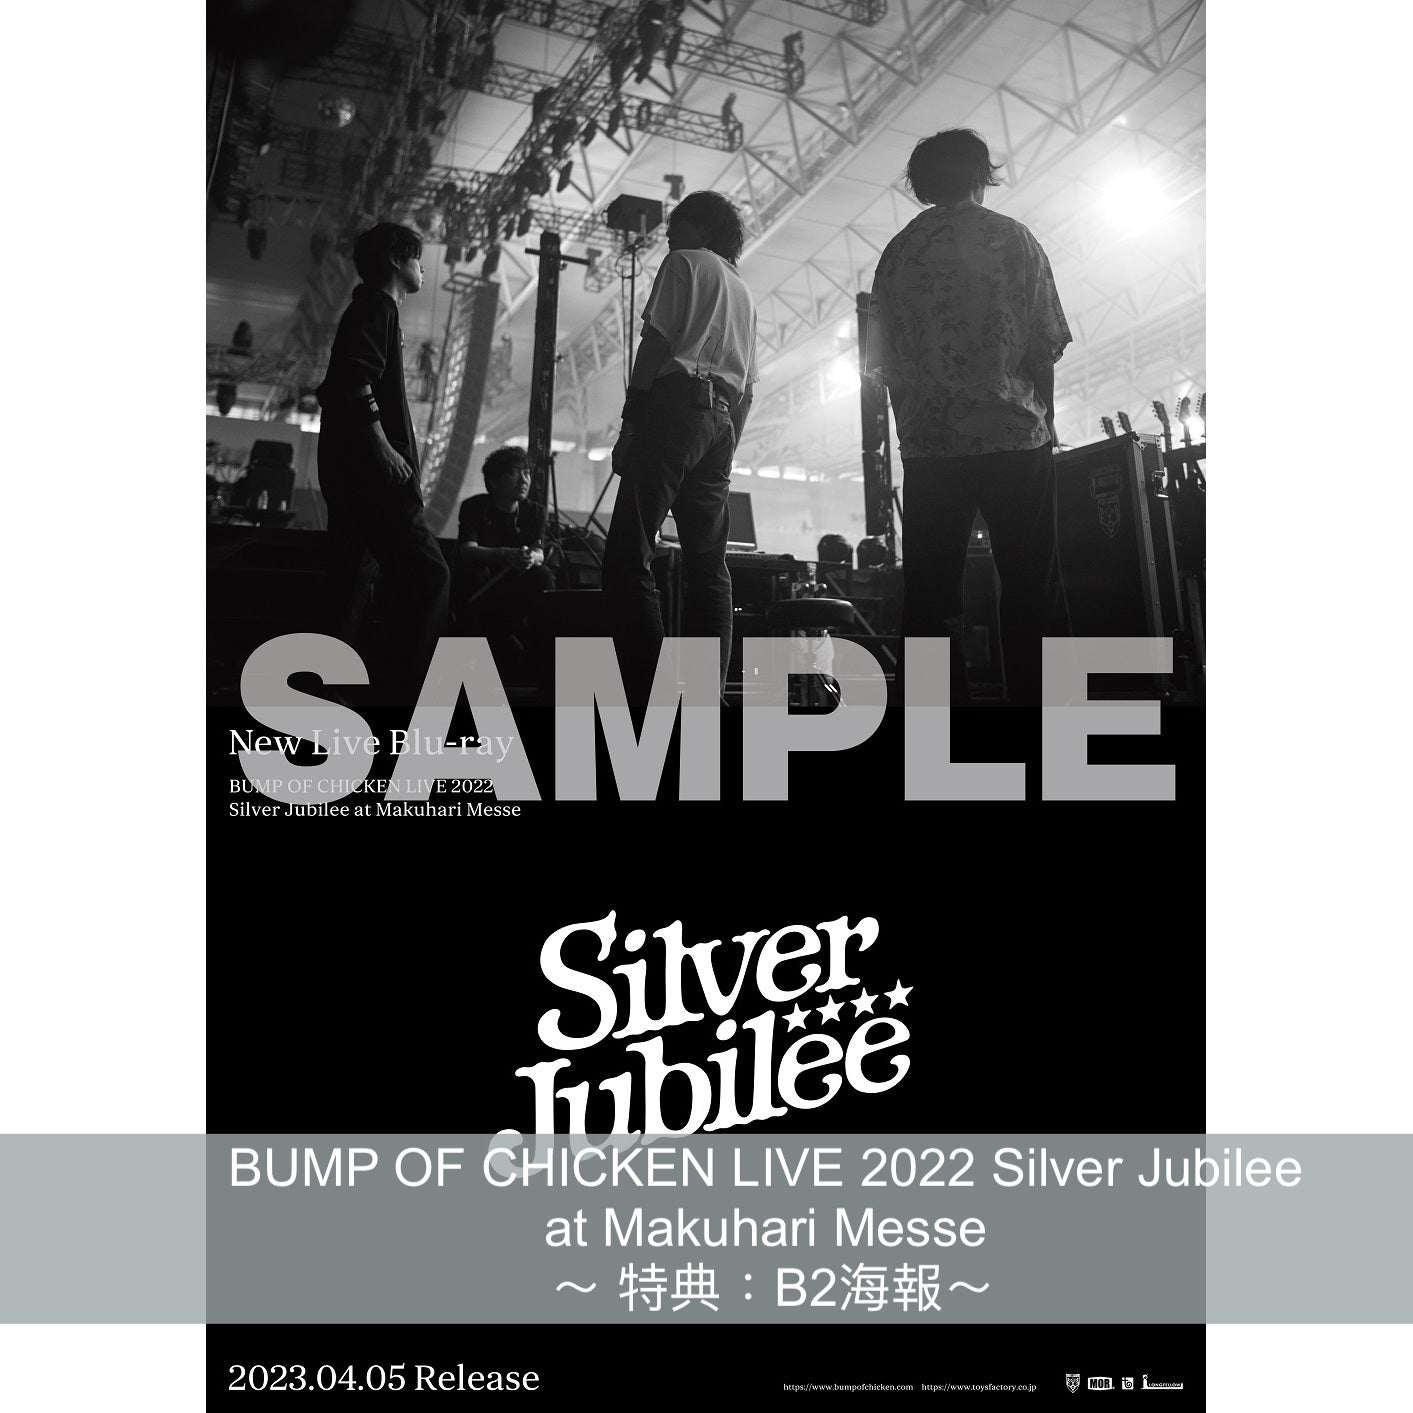 BUMP OF CHICKEN 出道25周年紀念 Live Blu-ray《BUMP OF CHICKEN TOUR 2022 Silver Jubilee at Zepp Haneda(TOKYO) 》、《BUMP OF CHICKEN LIVE 2022 Silver Jubilee at Makuhari Messe 》